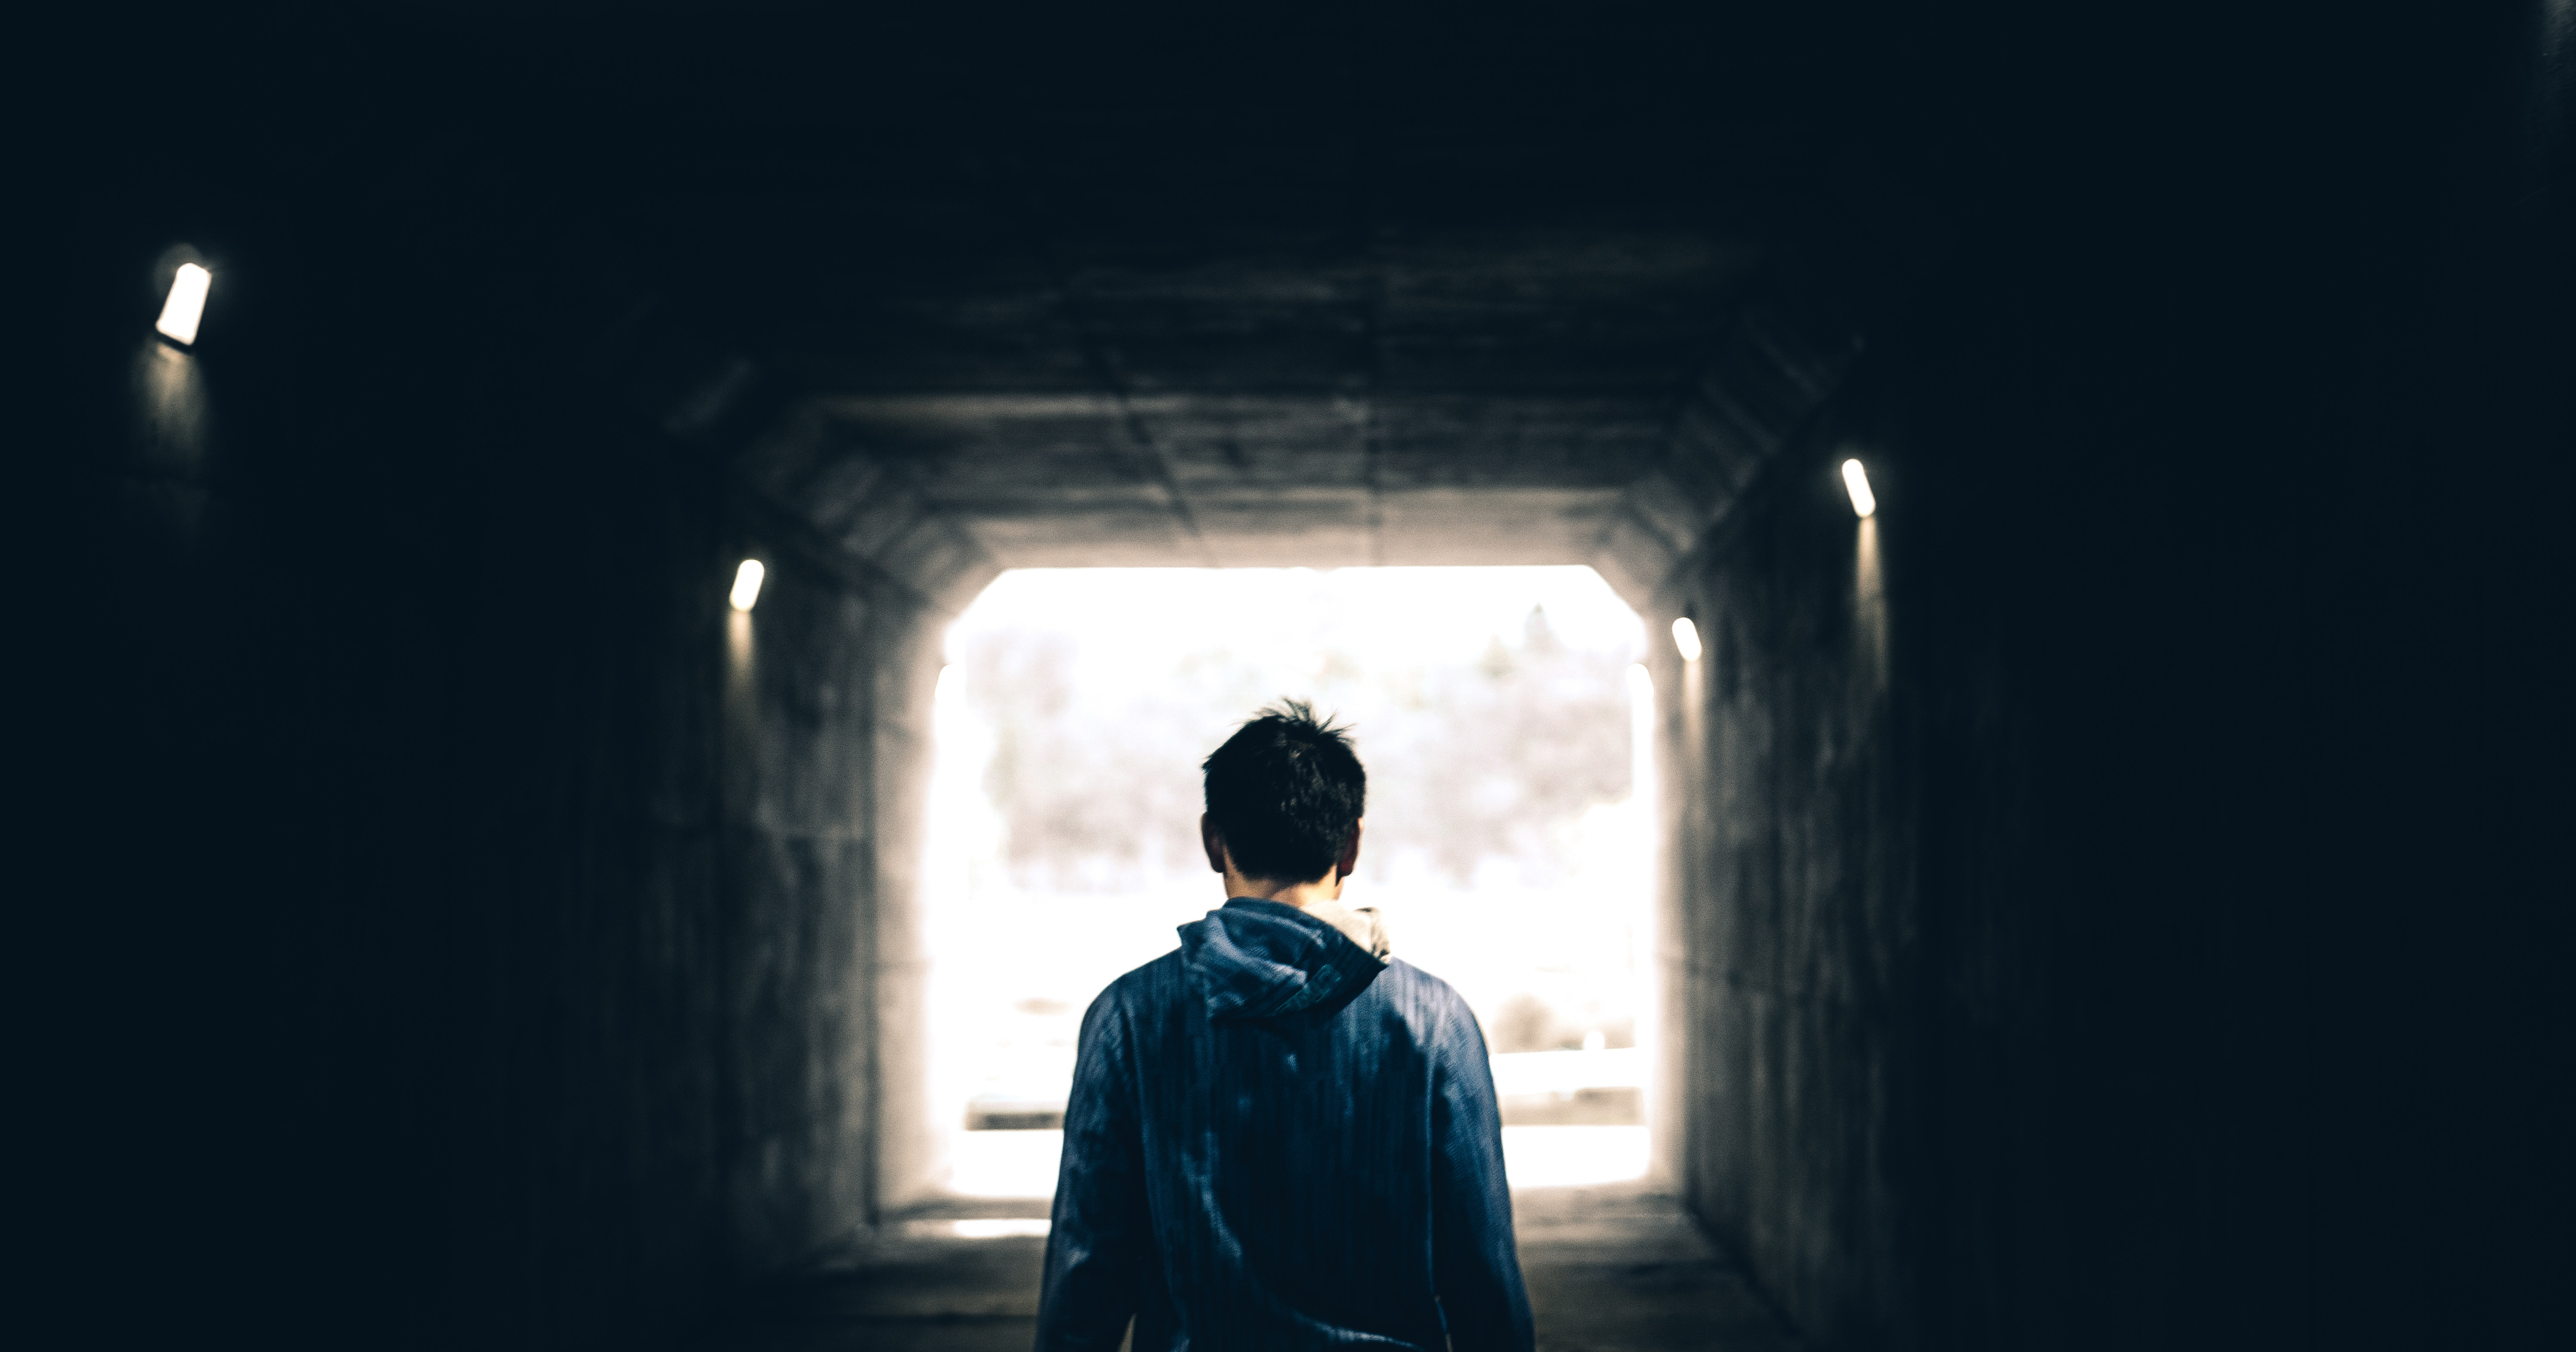 A teenagers seen from behind in a dark tunnel with light at the end